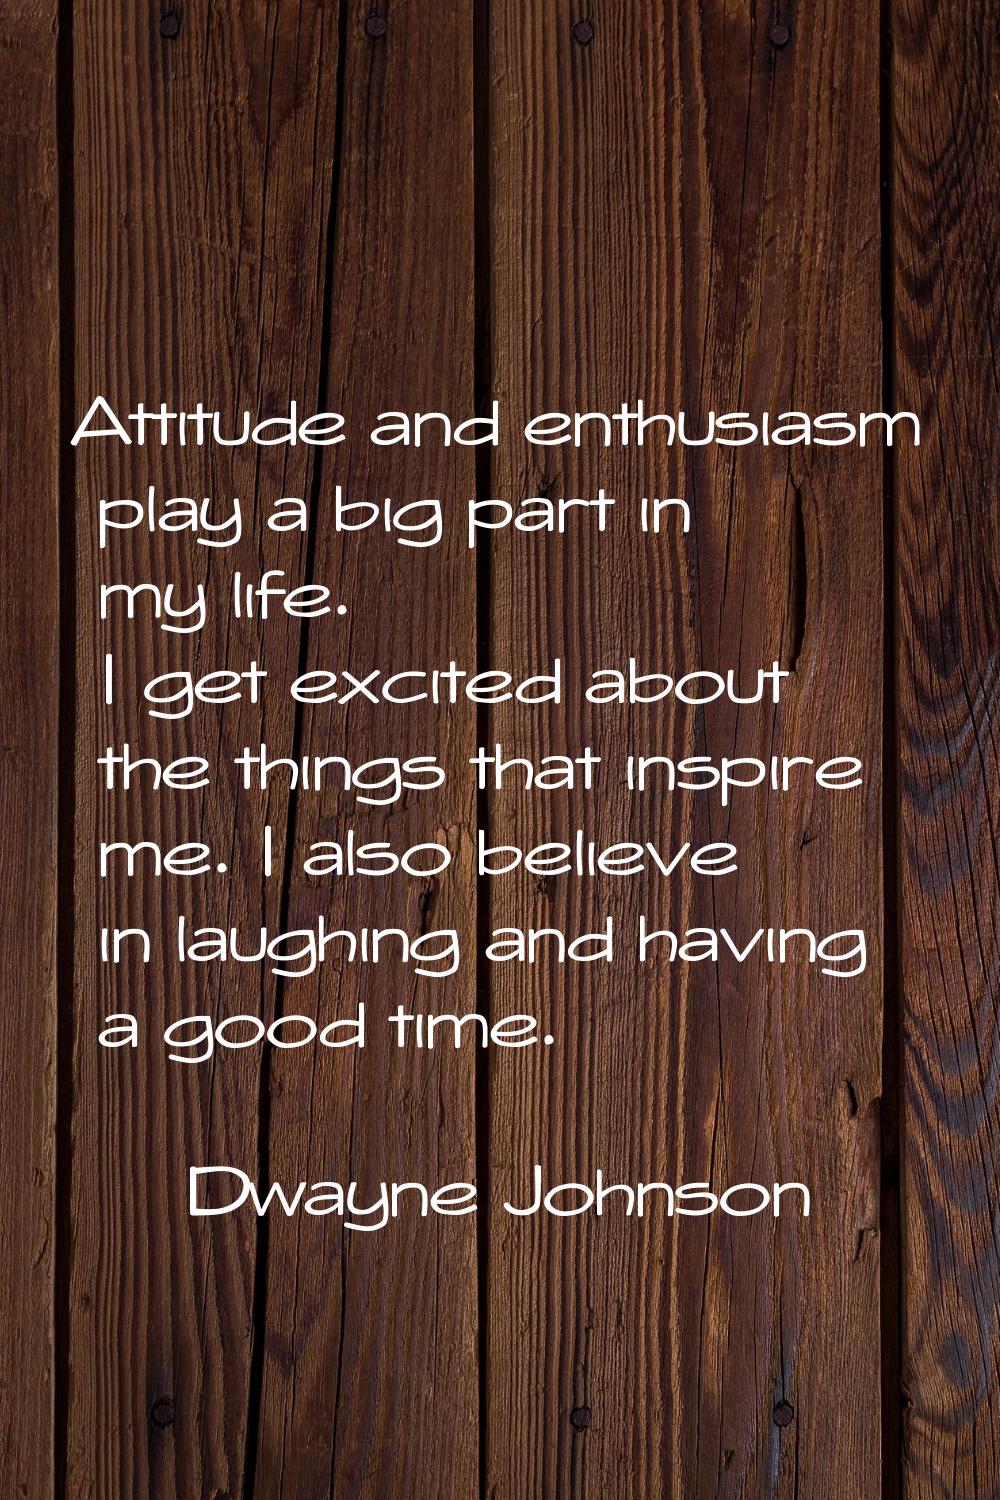 Attitude and enthusiasm play a big part in my life. I get excited about the things that inspire me.